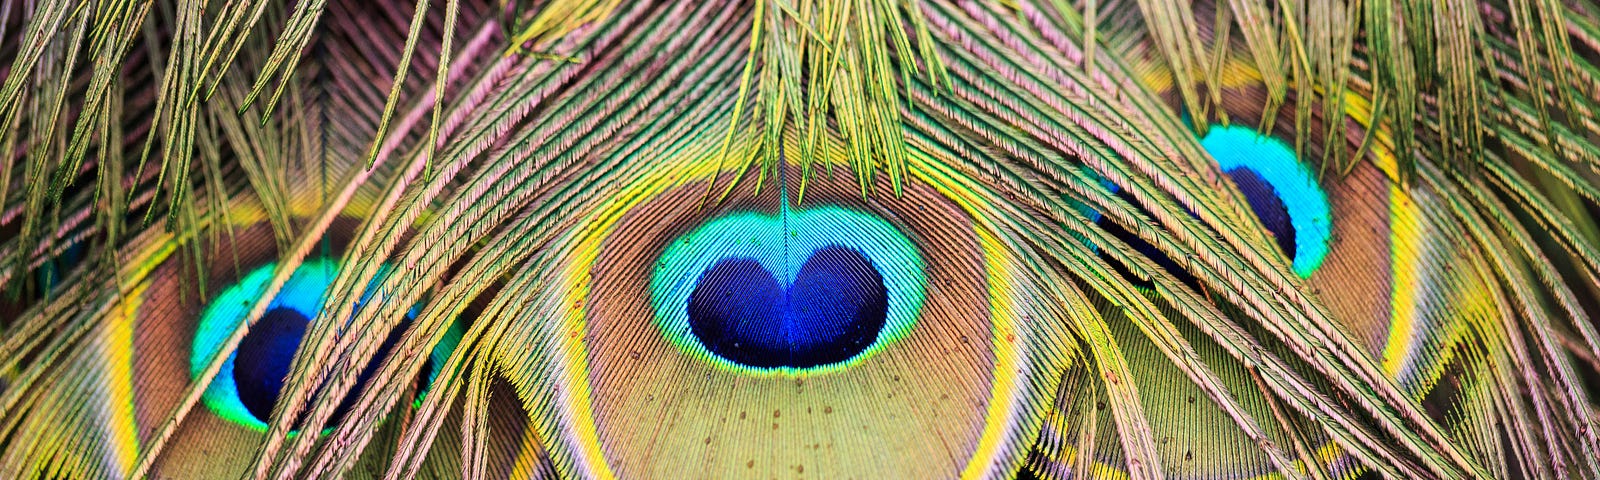 Billowing plumes of peacock feathers, a display of eyes looking at you.